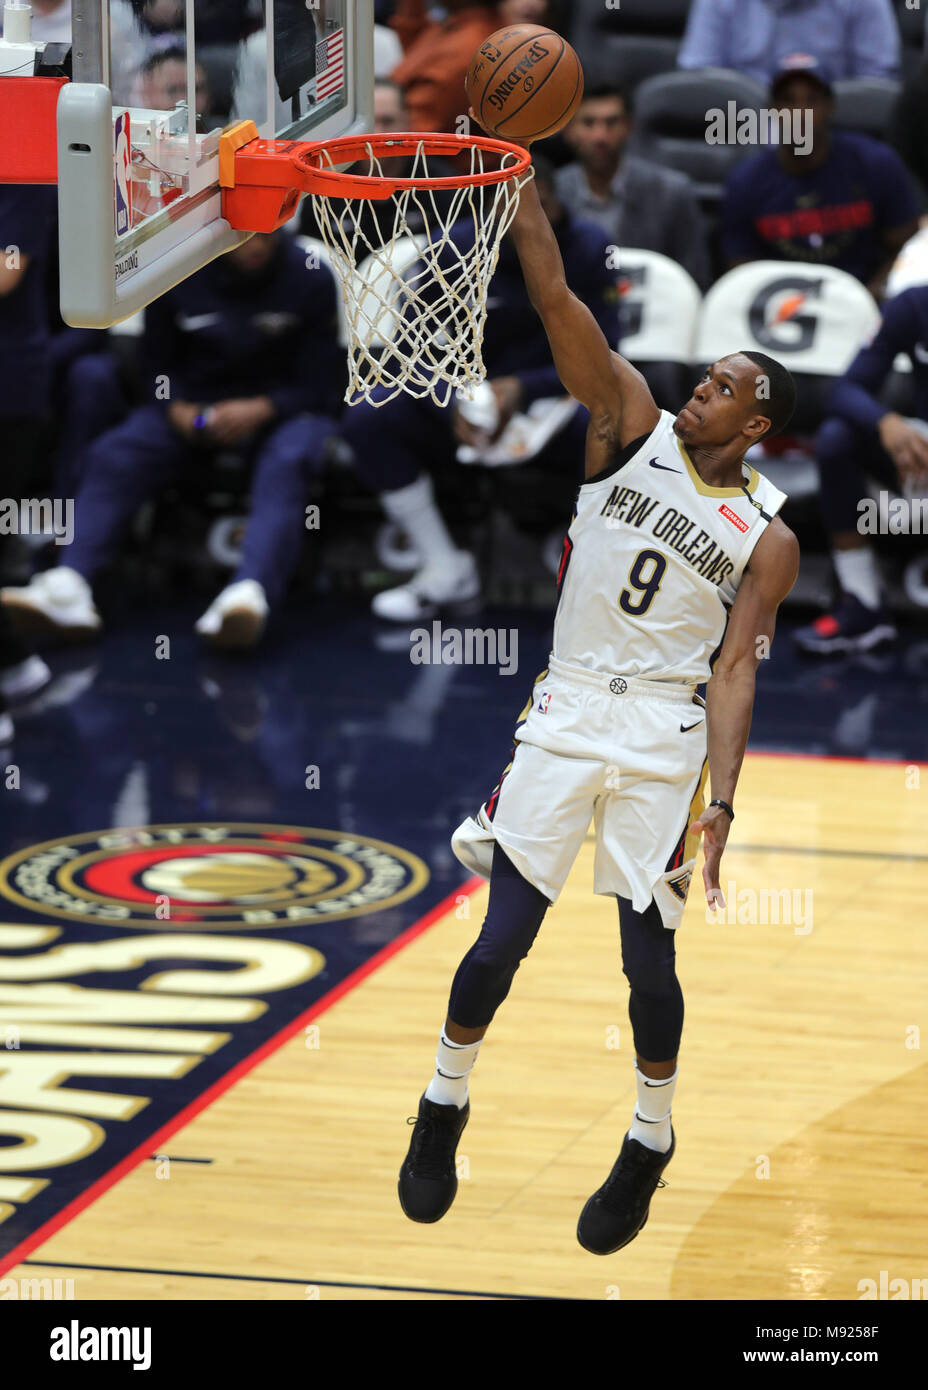 New Orleans, LA, USA. 20th Mar, 2018. New Orleans Pelicans guard Rajon Rondo (9) dunks the ball against Dallas Mavericks at the Smoothie King Center in New Orleans, LA. Stephen Lew/CSM/Alamy Live News Stock Photo